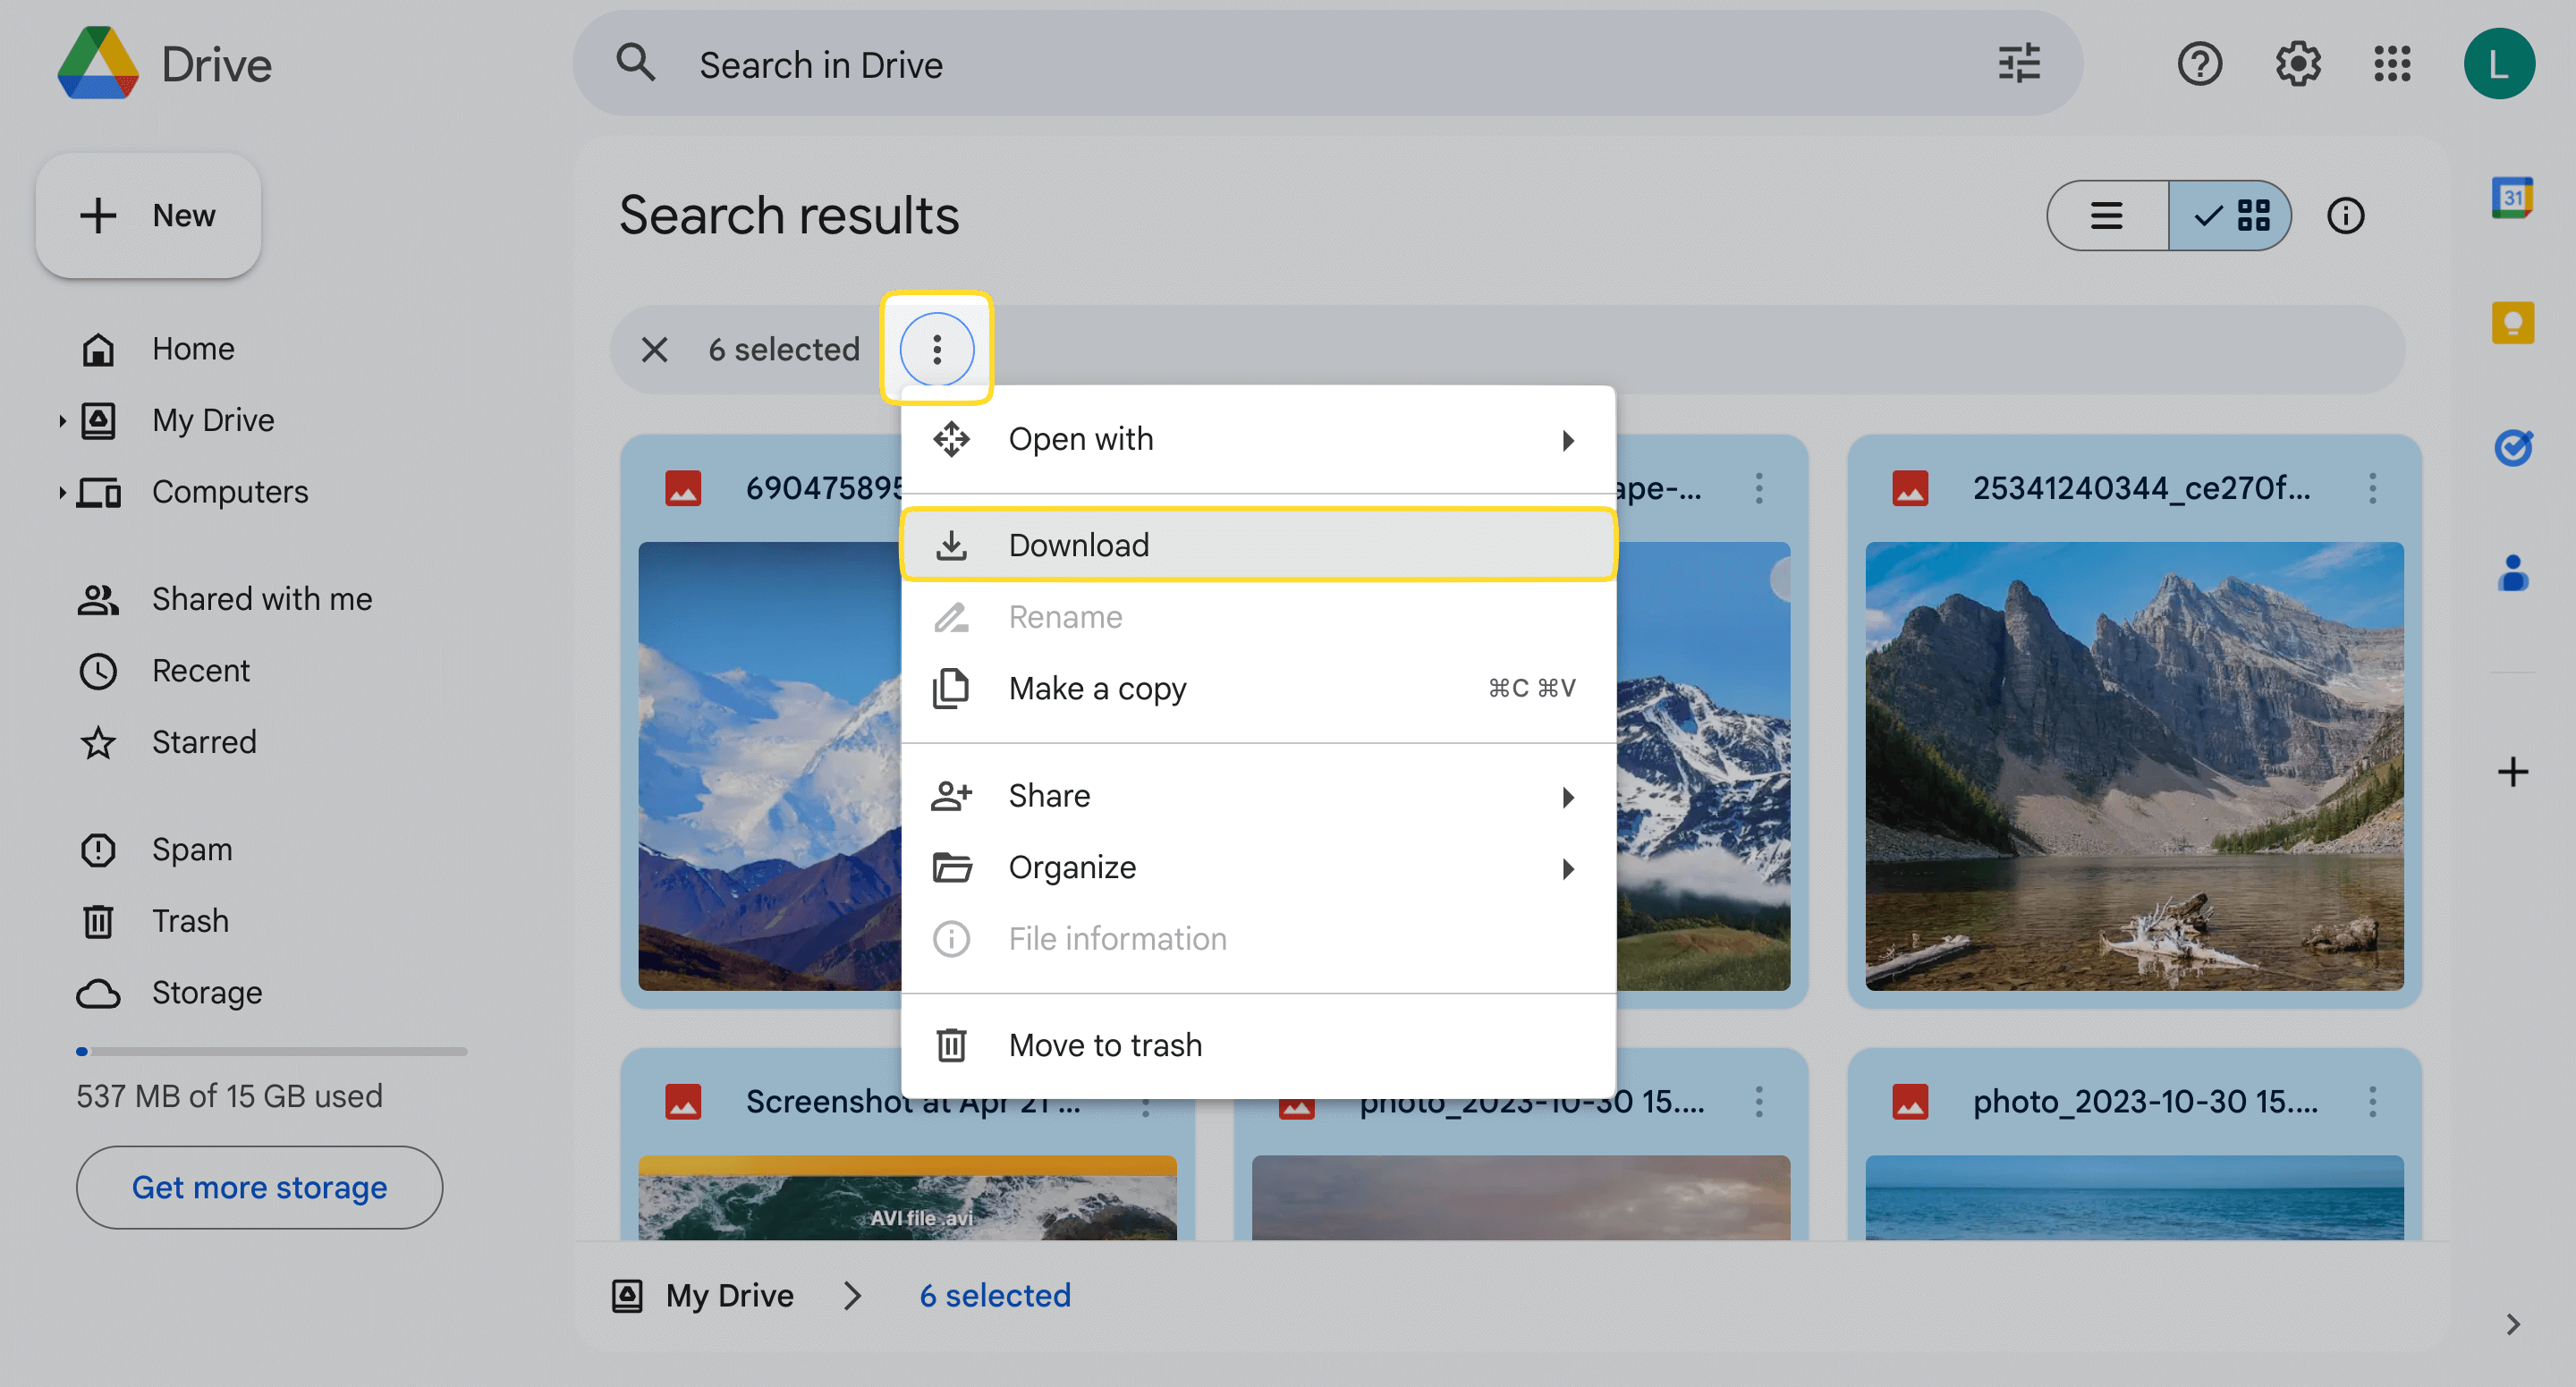 Google Drive - Files are selected - Download in the drop-down menu is shown